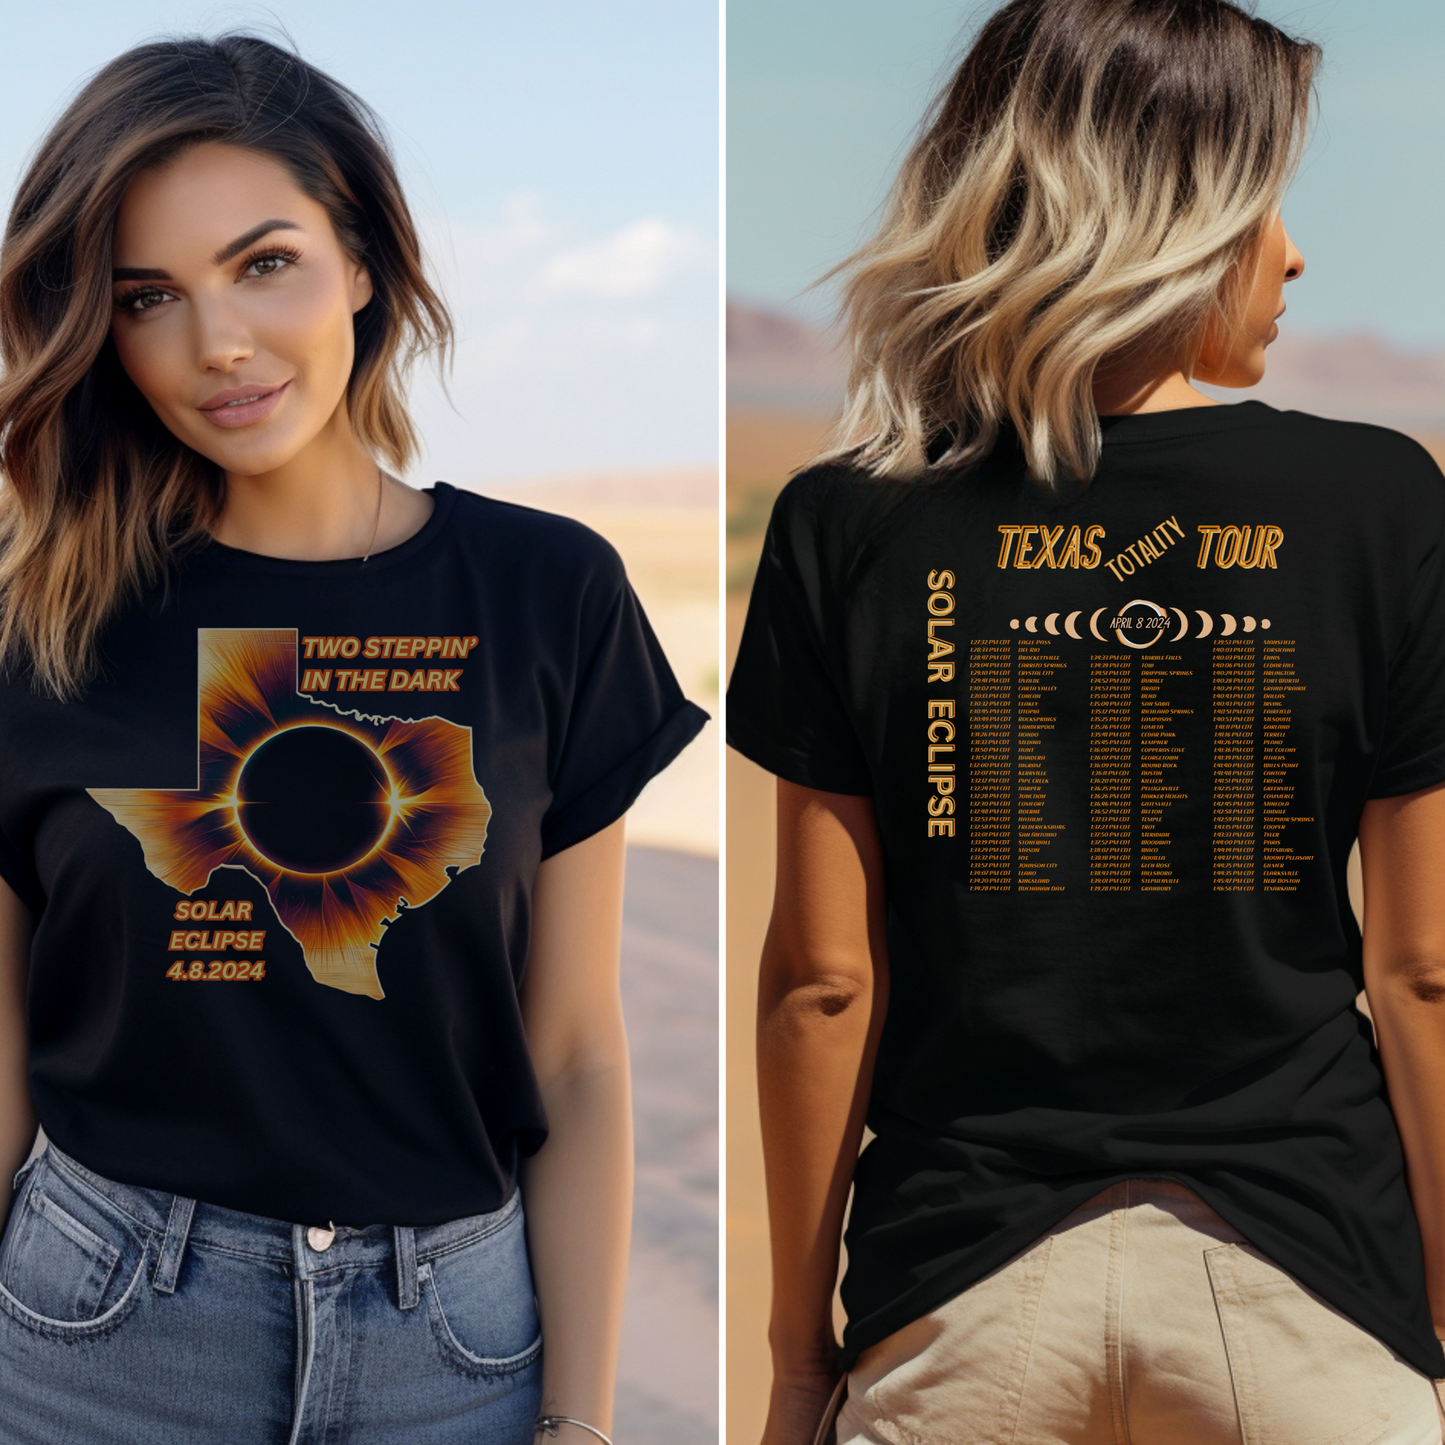 Texas Solar Eclipse graphic reads Two Steppin' in the dark Solar Eclipse 4.8.2024 and 2024 Eclipse Texas Totality Tour 97 Texas Cities listed in Concert Style back of Tee